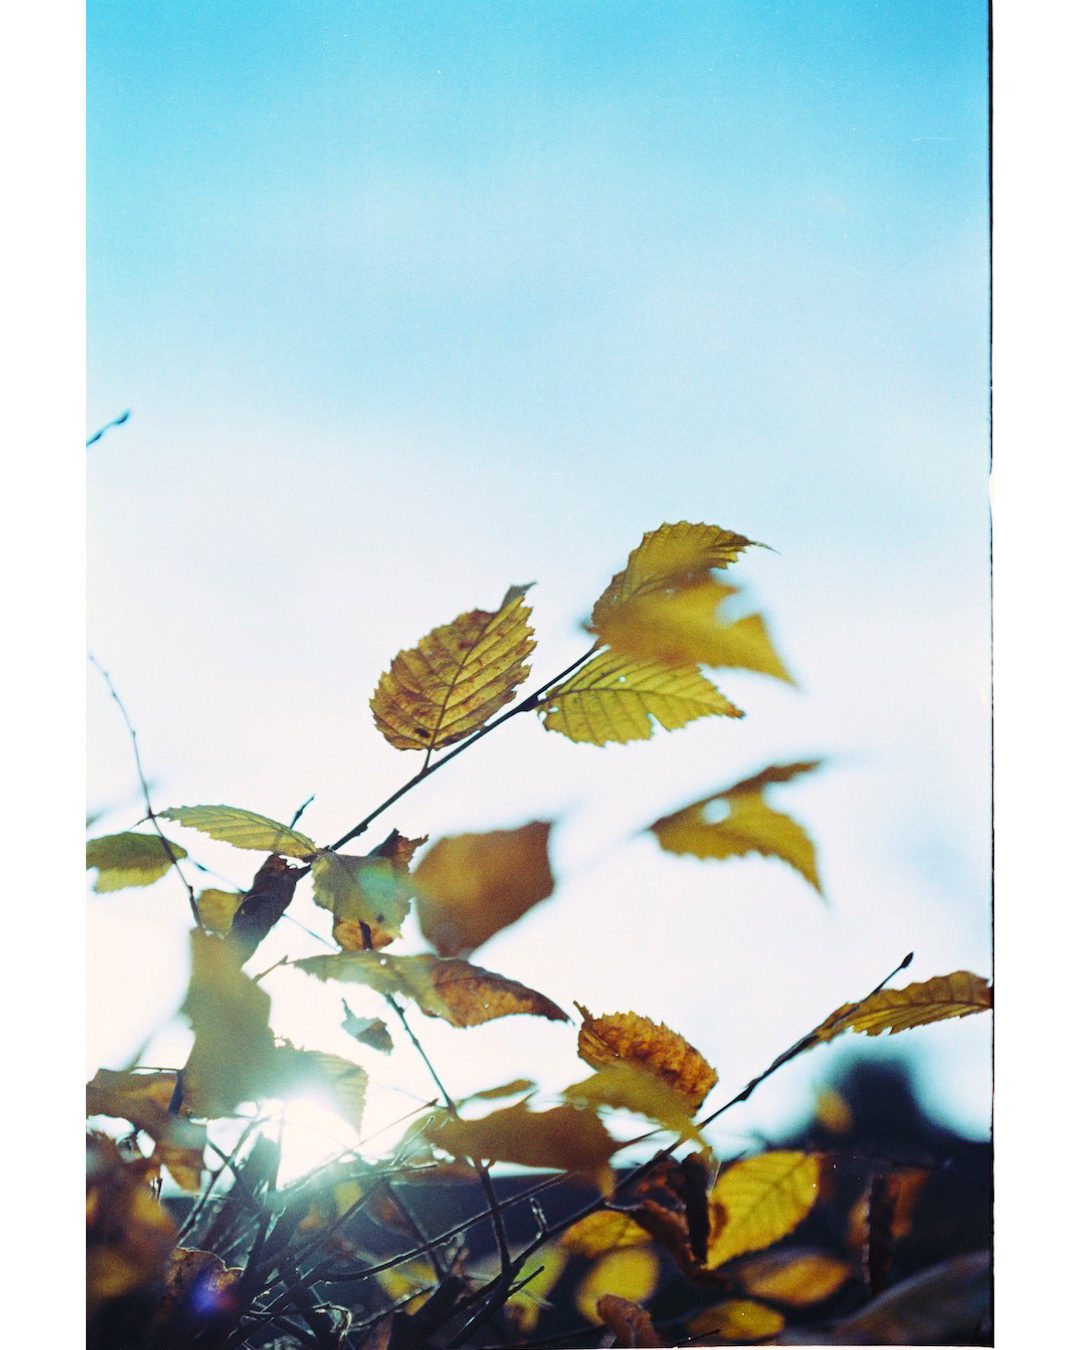 autumn analogue photography Roses leaves Nature fotografie Analogfotografie analogue nature autum